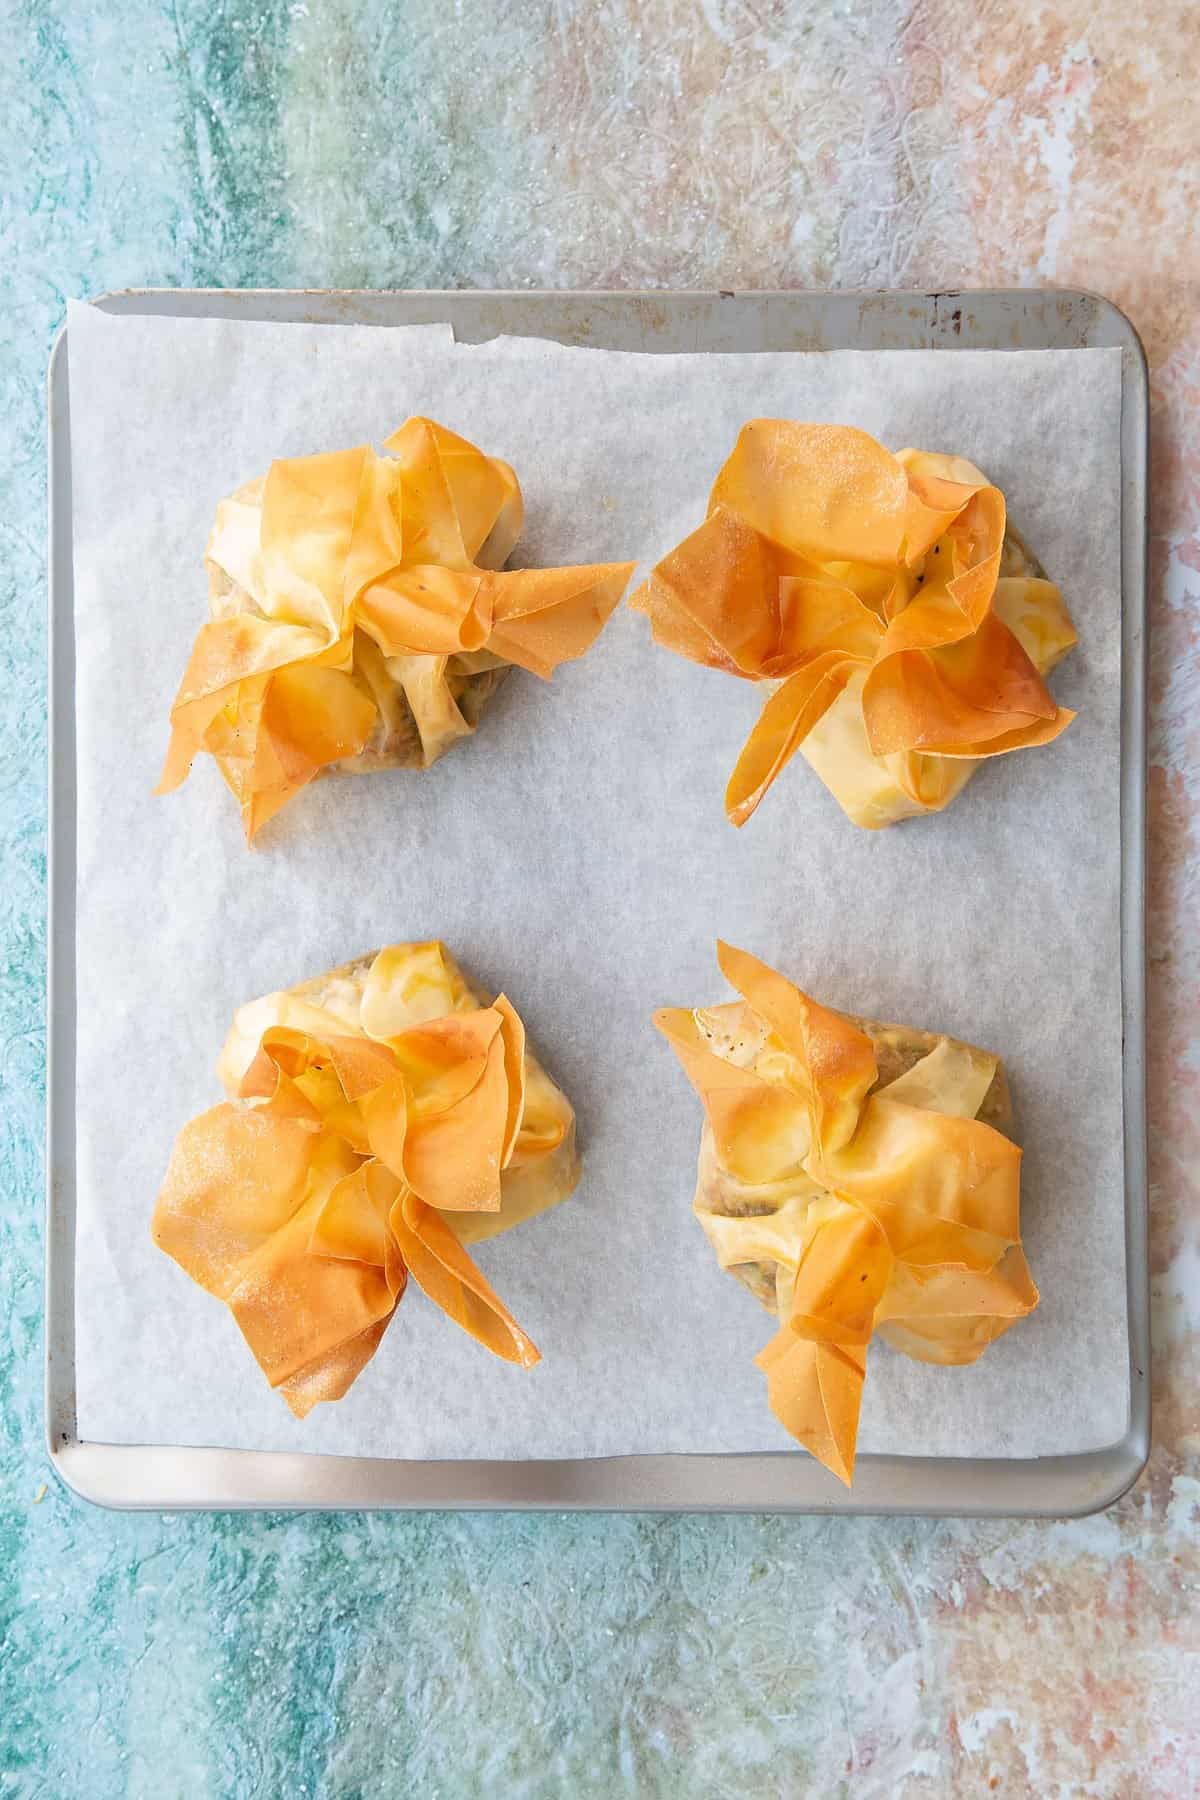 Filo parcels stuffed with goat cheese on a piece of parchment paper.